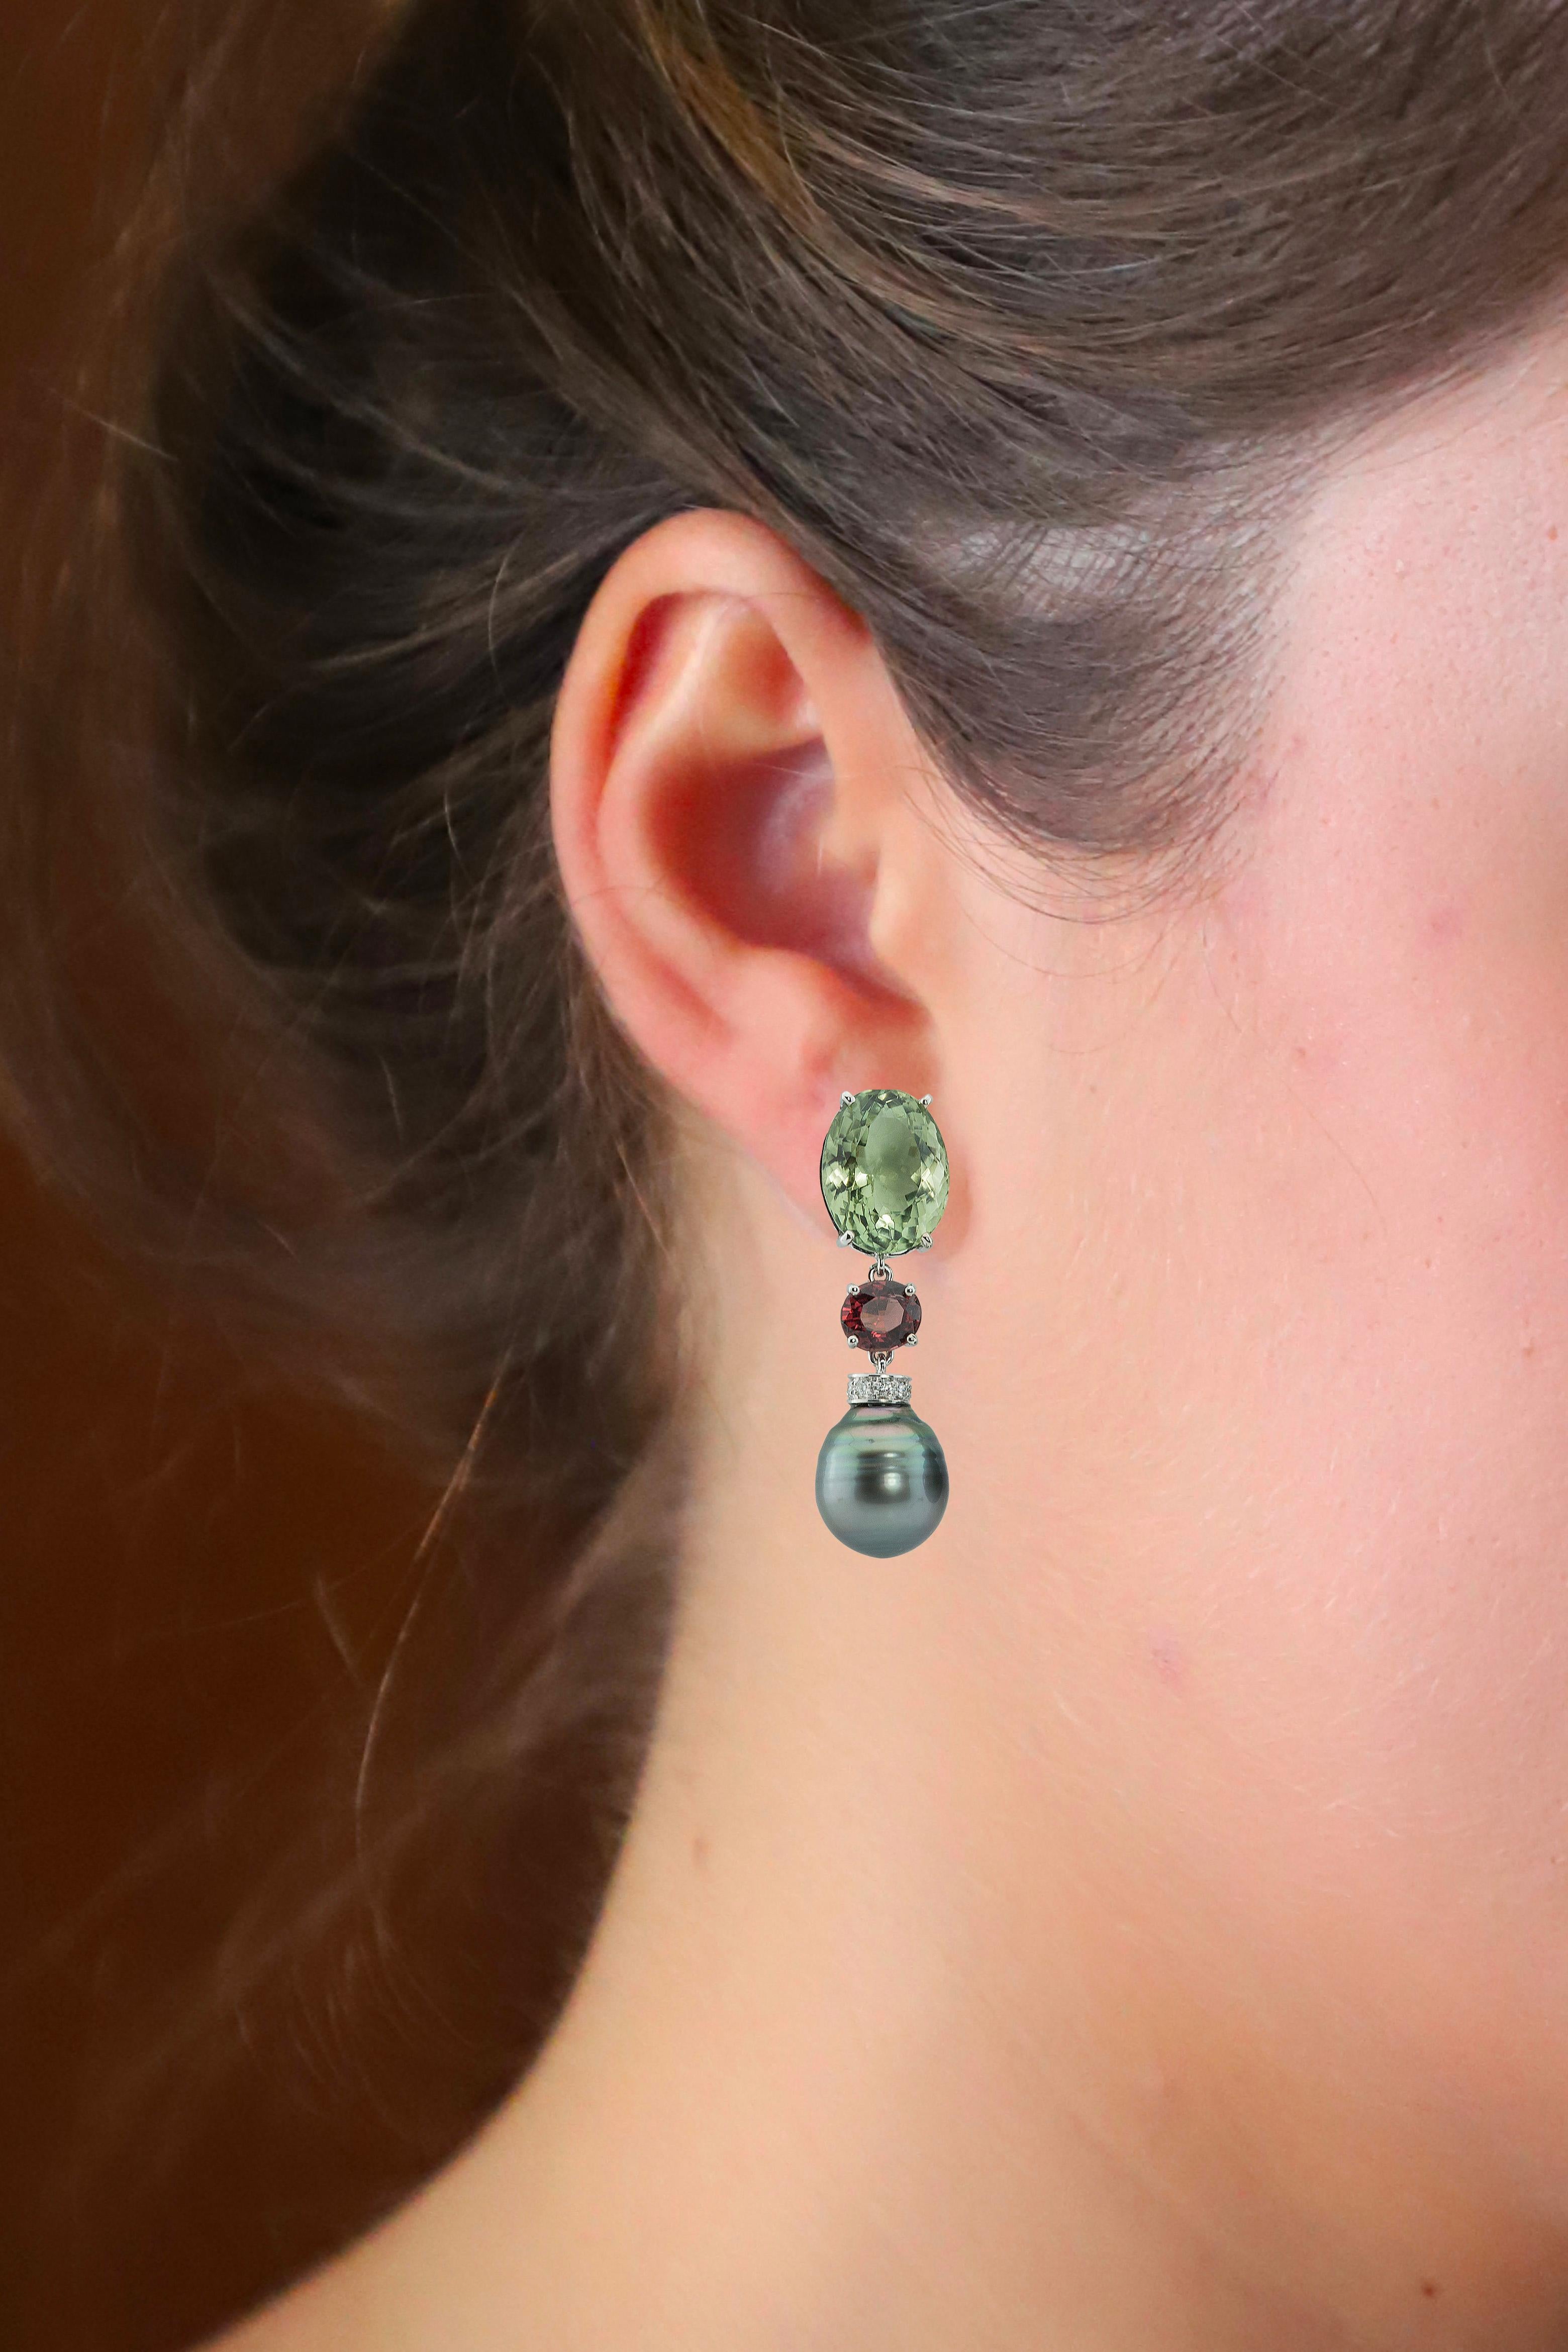 Introducing the exquisite Rossella Ugolini drop earrings, meticulously crafted in Italy from luxurious 18K white Gold, adorned with Mint Green Amethyst ,Garnet, White Diamonds and Gray Pearls. 

Handcrafted for pierced ears, on each earring rests a